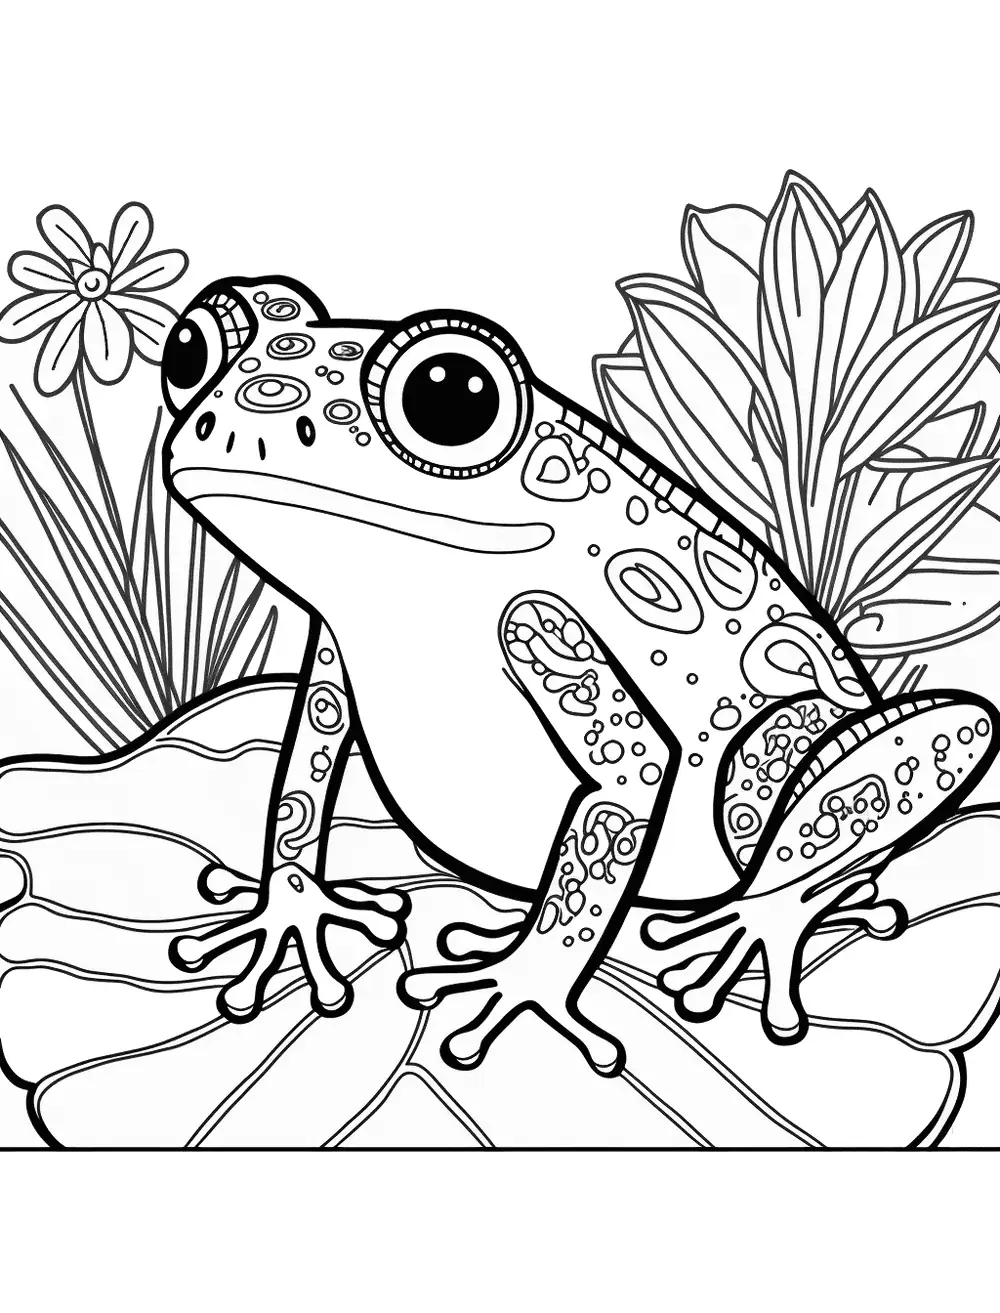 Red-Eyed Frog Coloring Page - A frog with bright red eyes, surrounded by leaves and flowers